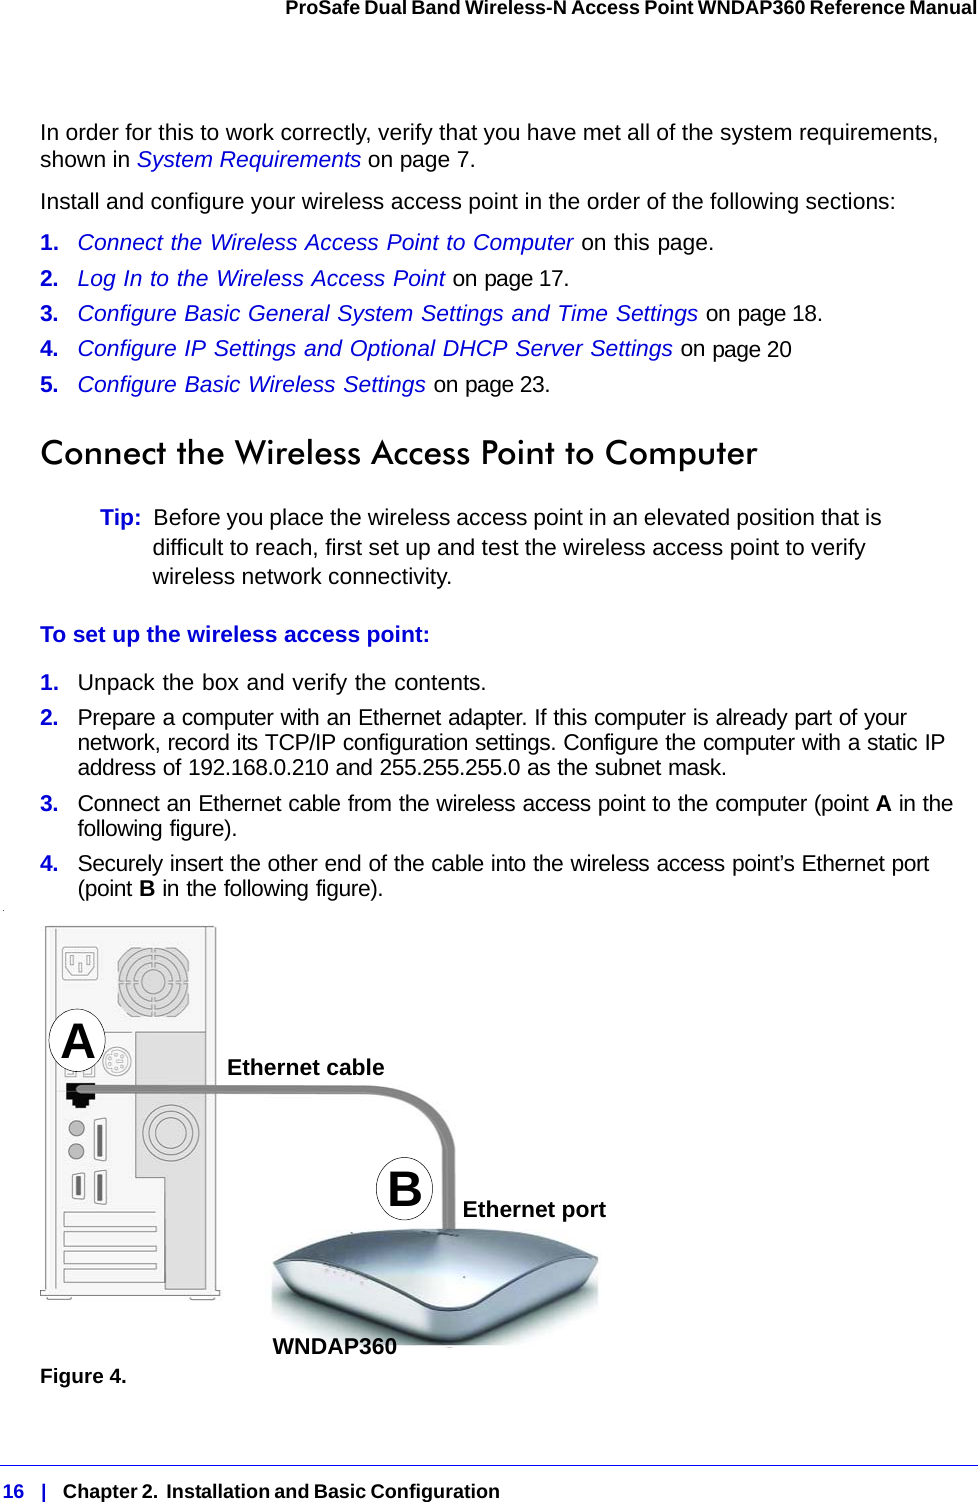 16   |   Chapter 2.  Installation and Basic Configuration  ProSafe Dual Band Wireless-N Access Point WNDAP360 Reference Manual In order for this to work correctly, verify that you have met all of the system requirements, shown in System Requirements on page 7.Install and configure your wireless access point in the order of the following sections:1.  Connect the Wireless Access Point to Computer on this page.2.  Log In to the Wireless Access Point on page 17.3.  Configure Basic General System Settings and Time Settings on page 18.4.  Configure IP Settings and Optional DHCP Server Settings on page 205.  Configure Basic Wireless Settings on page 23.Connect the Wireless Access Point to ComputerTip:  Before you place the wireless access point in an elevated position that is difficult to reach, first set up and test the wireless access point to verify wireless network connectivity.To set up the wireless access point:1.  Unpack the box and verify the contents.2.  Prepare a computer with an Ethernet adapter. If this computer is already part of your network, record its TCP/IP configuration settings. Configure the computer with a static IP address of 192.168.0.210 and 255.255.255.0 as the subnet mask.3.  Connect an Ethernet cable from the wireless access point to the computer (point A in the following figure).4.  Securely insert the other end of the cable into the wireless access point’s Ethernet port (point B in the following figure)..Figure 4. ABEthernet cableEthernet portWNDAP360